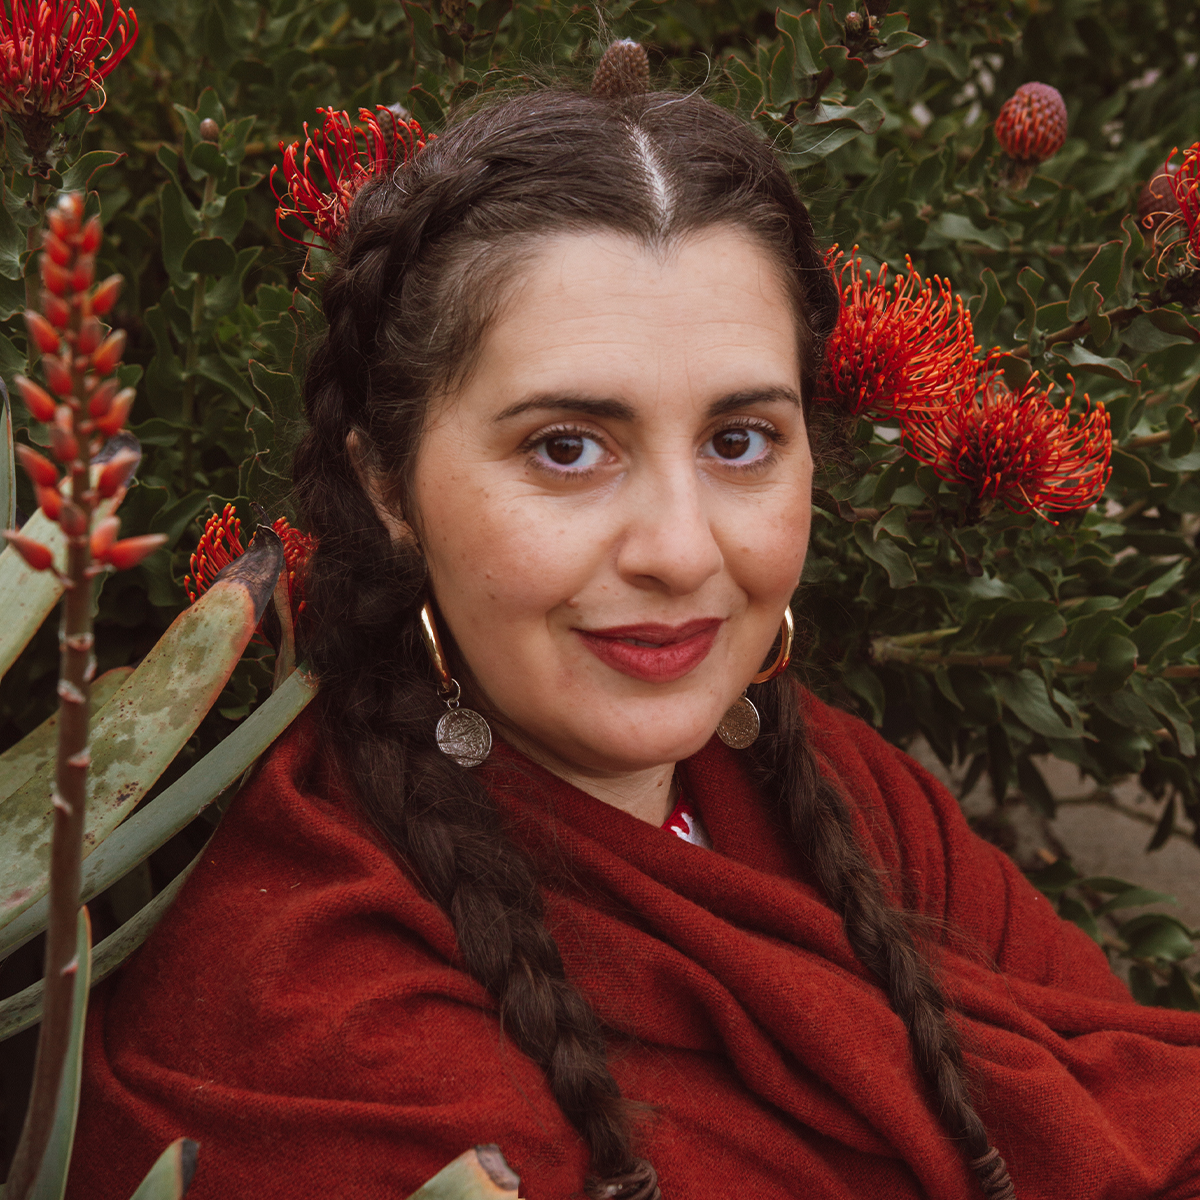 Layla K. Feghali color portrait. Layla is Lebanese American and has long dark brown hair that is braided and goes down past her shoulders. She is smiling, wearing a red shawl, and is posed outside amongst red flowers.  